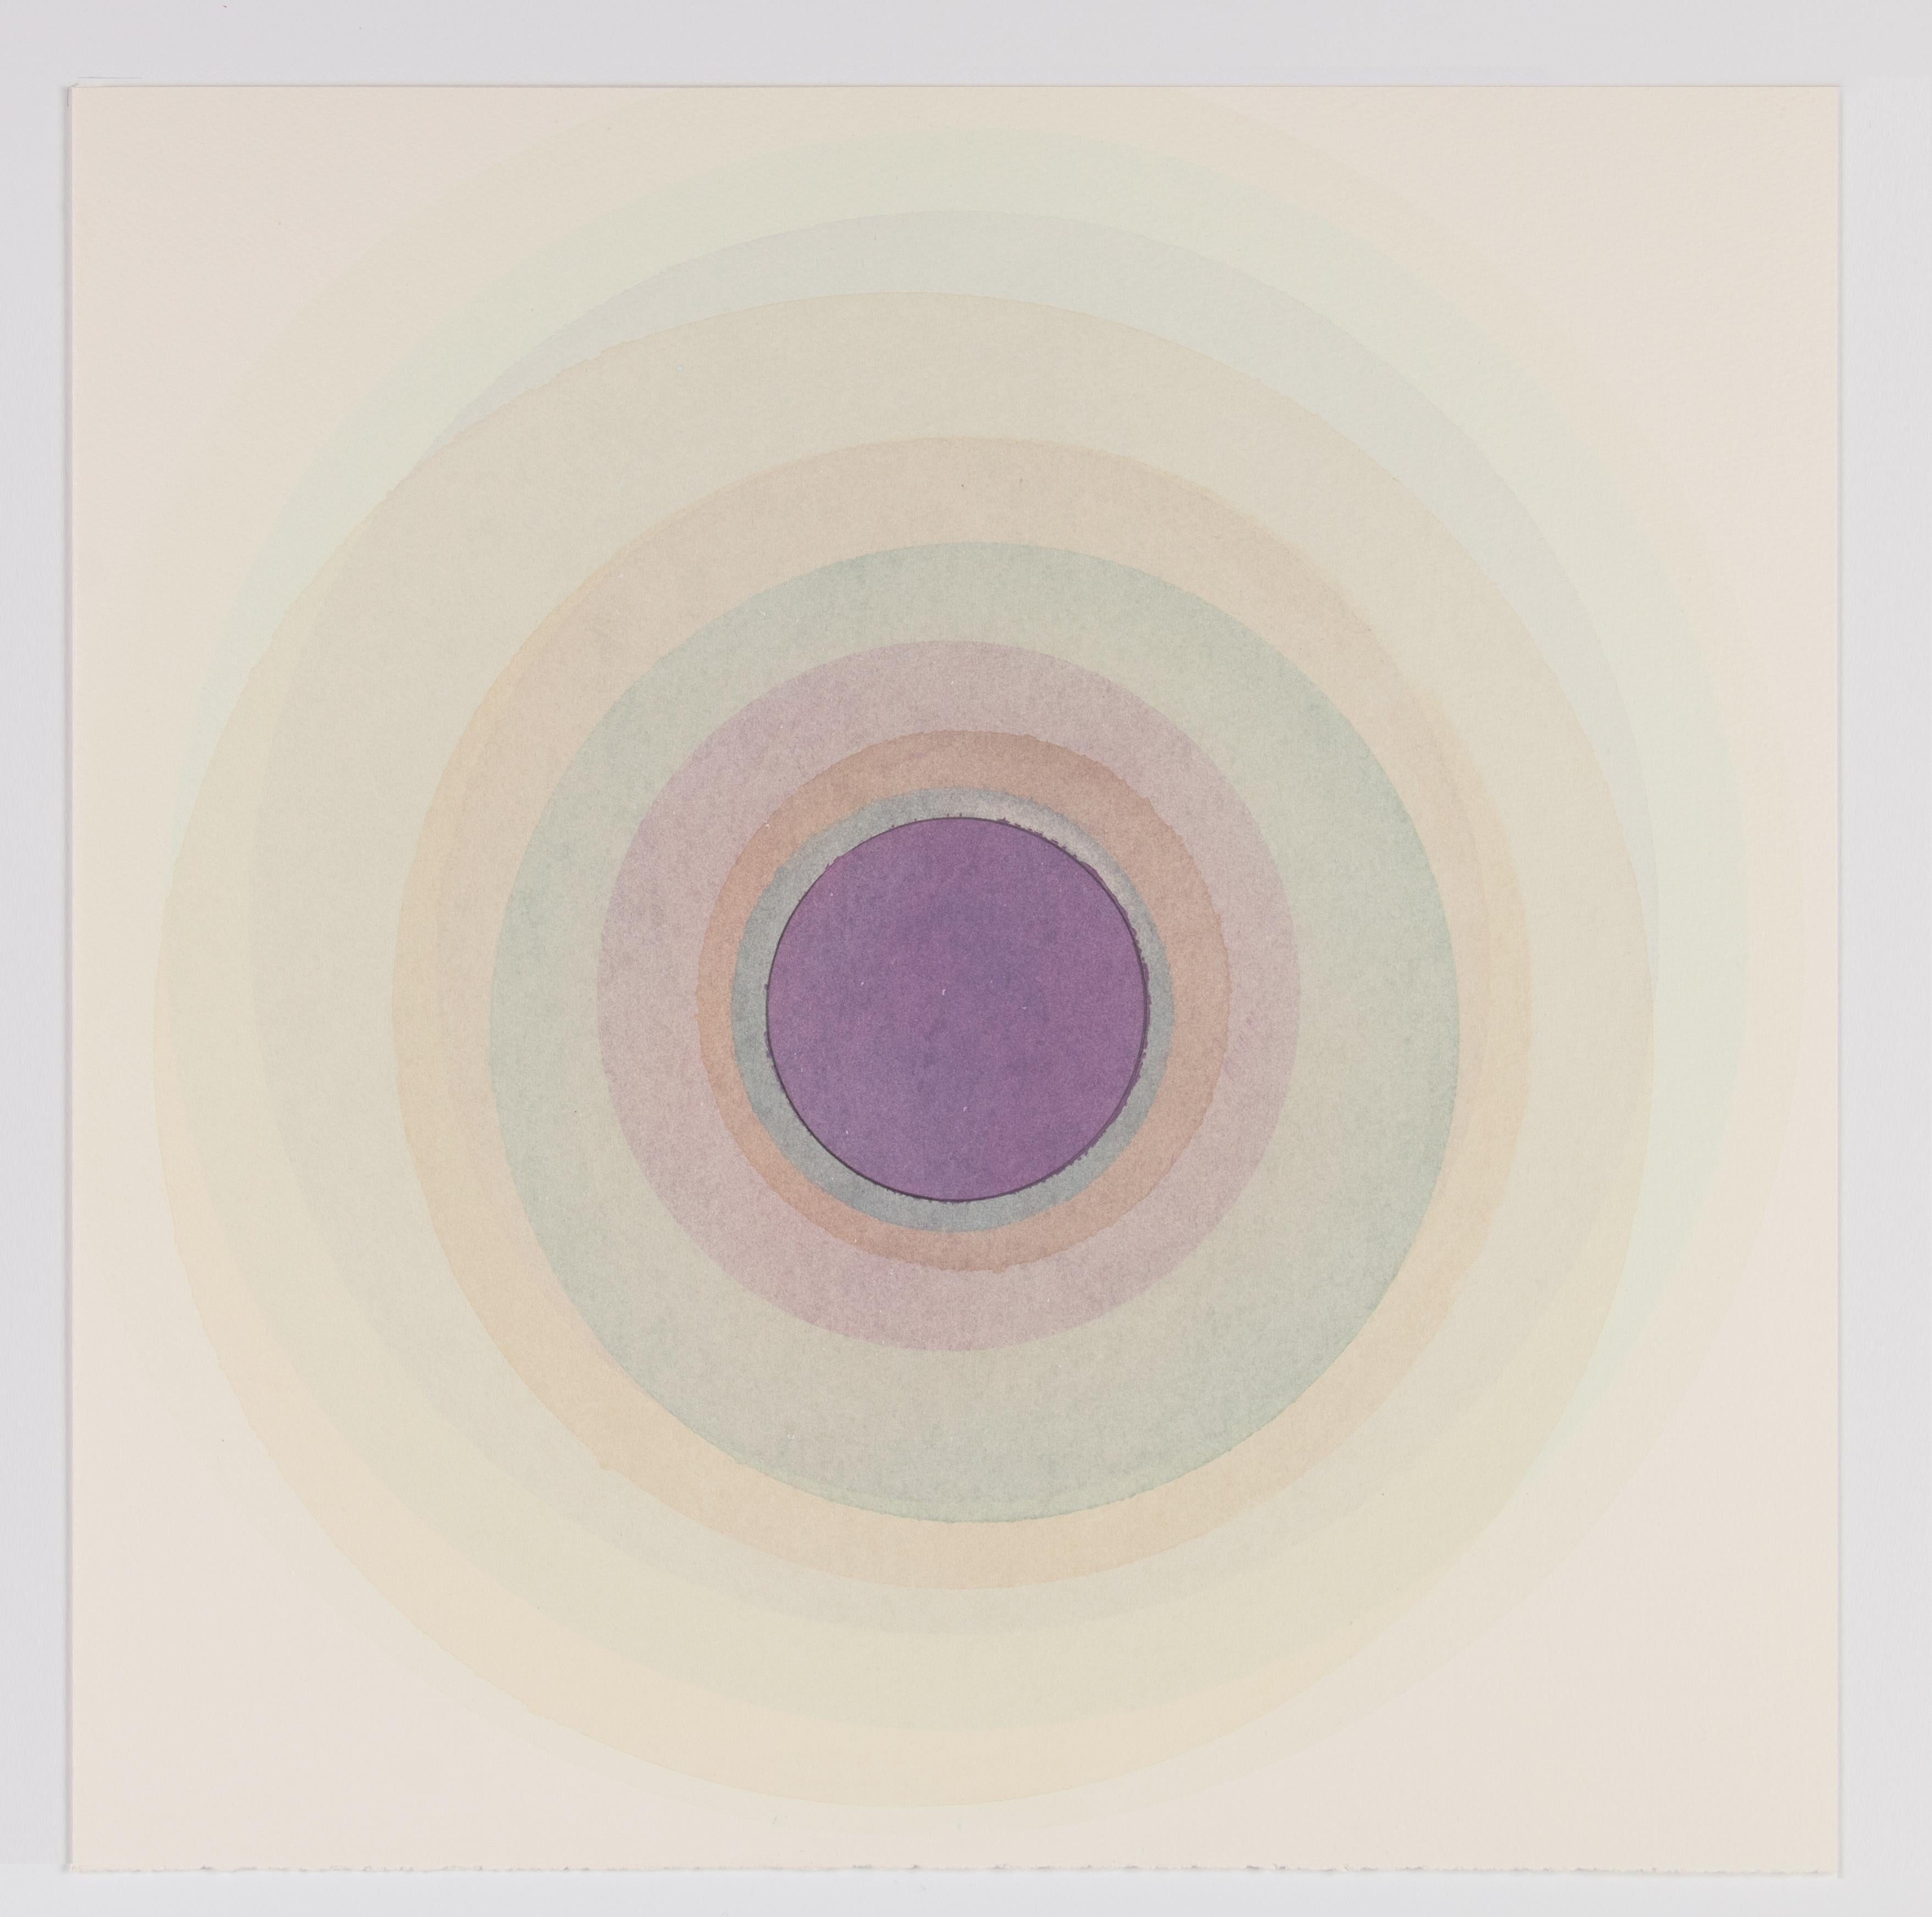 Evan Venegas Abstract Drawing - Coaxist 10419 - Soft pastel color abstract geometric circle watercolor on paper